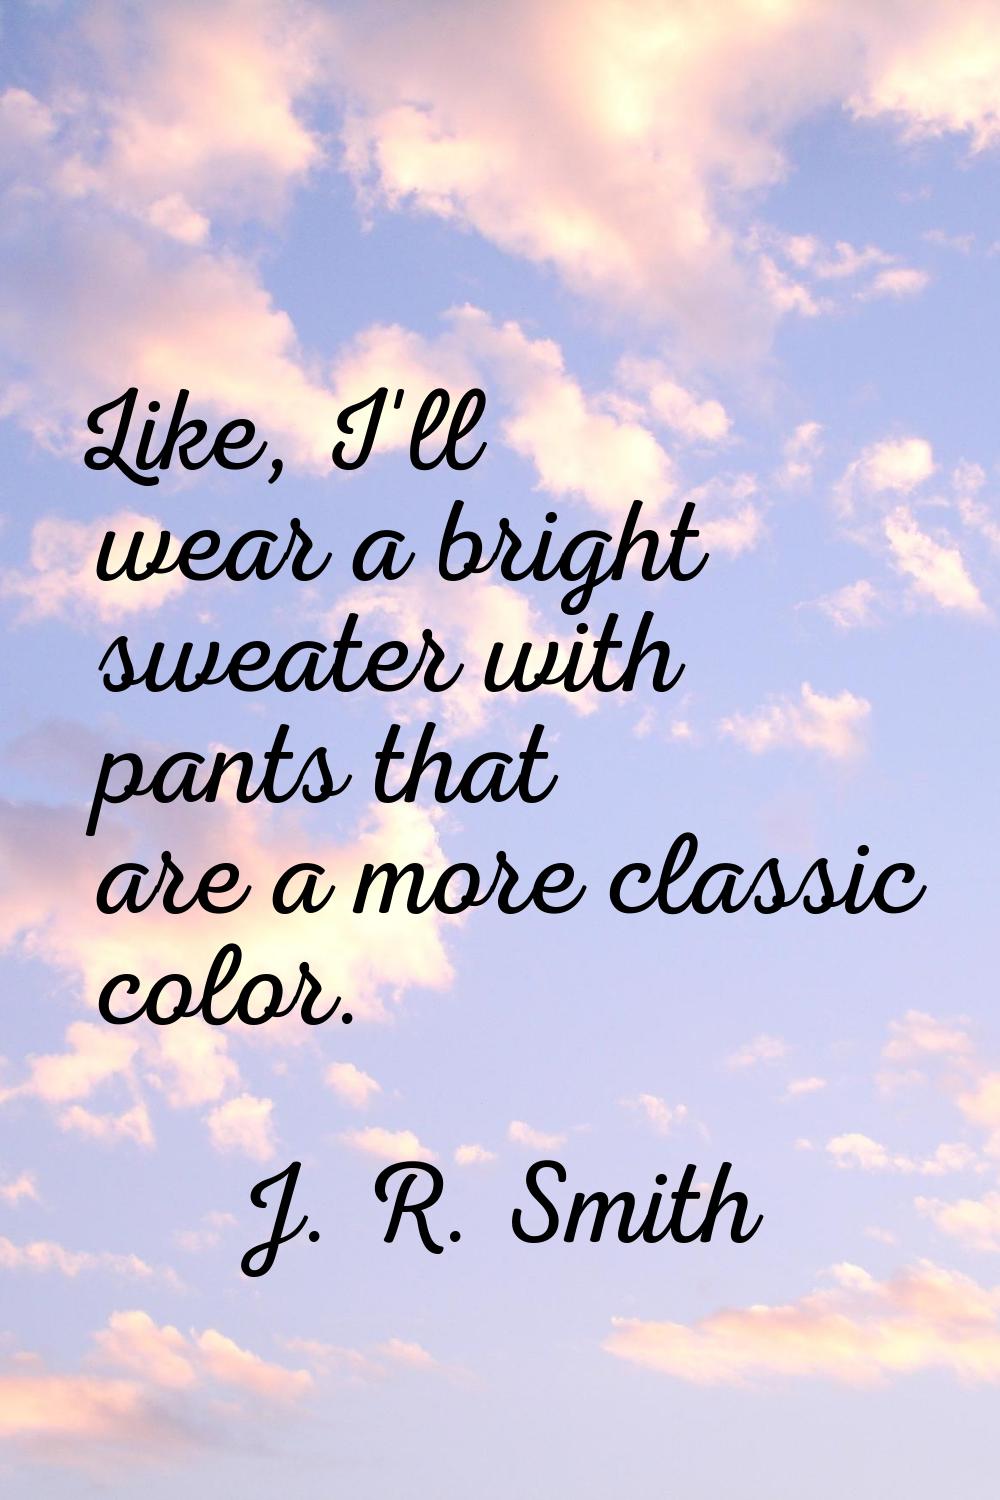 Like, I'll wear a bright sweater with pants that are a more classic color.